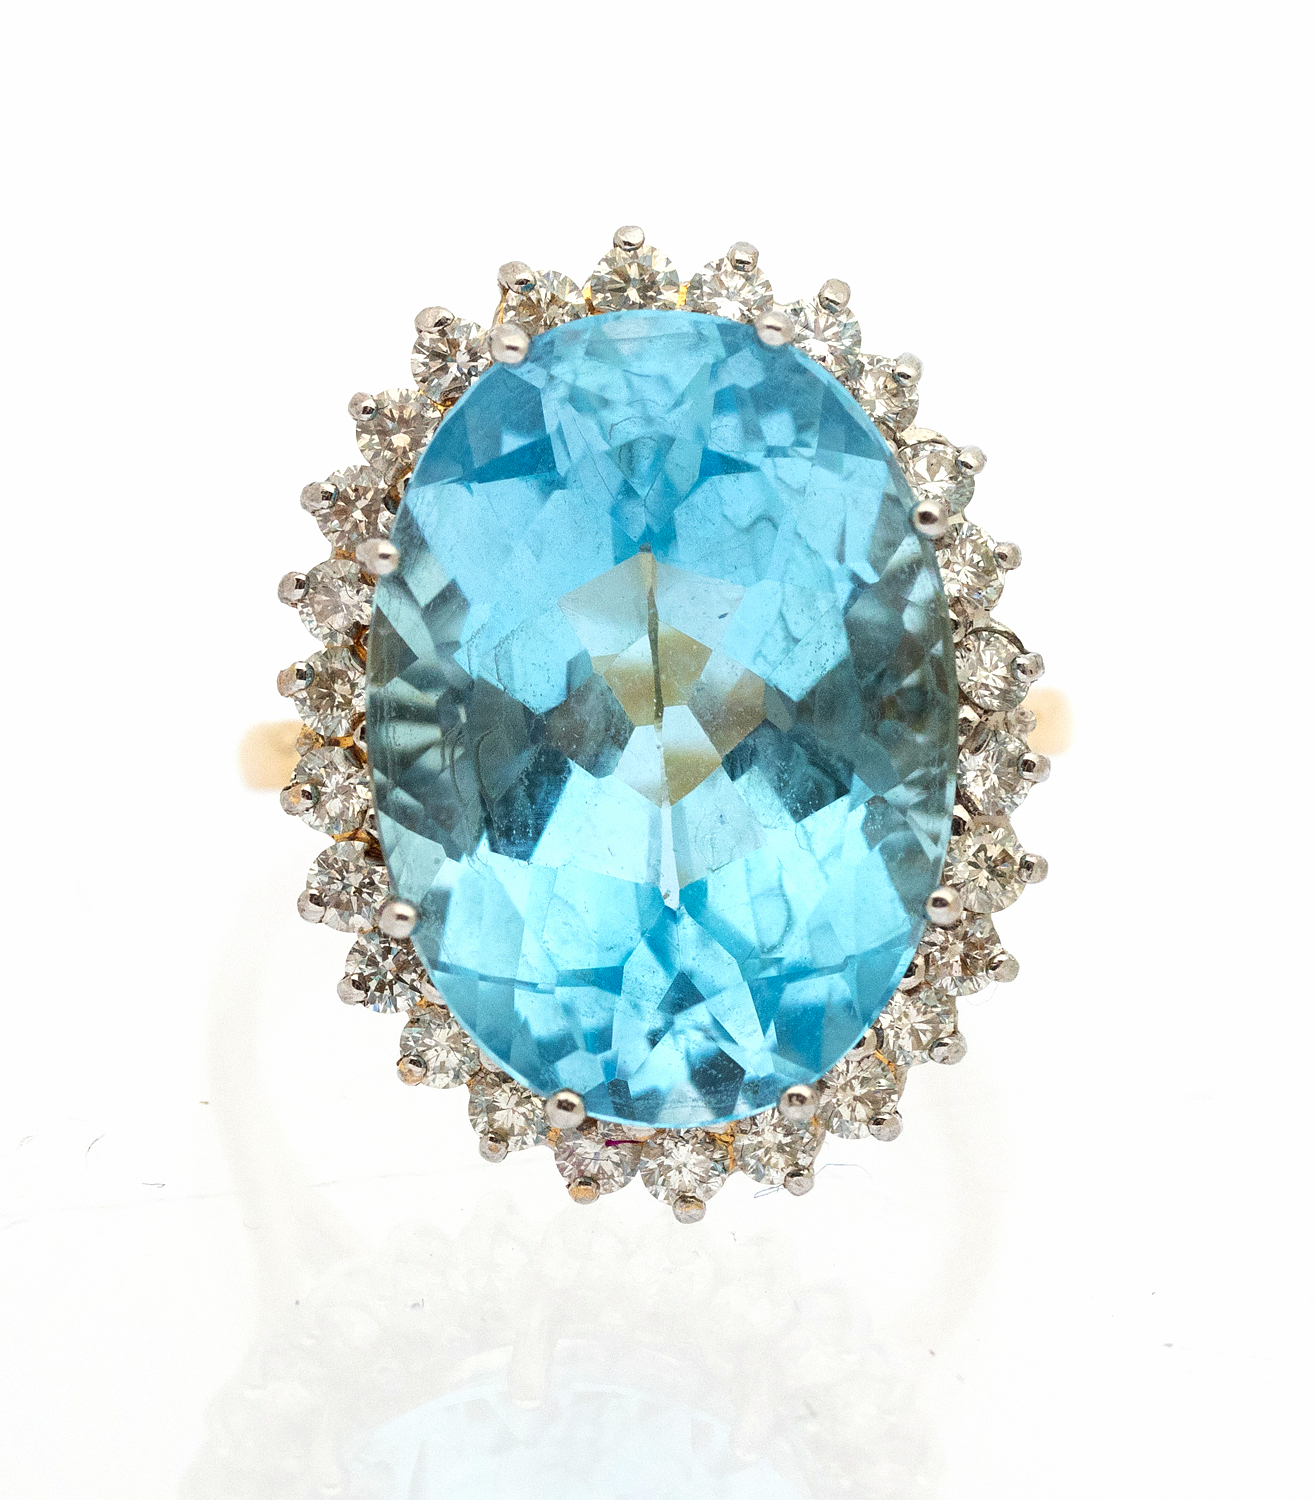 A blue topaz and diamond set 18ct gold cocktail ring, comprising an oval mixed cut blue topaz (Swiss